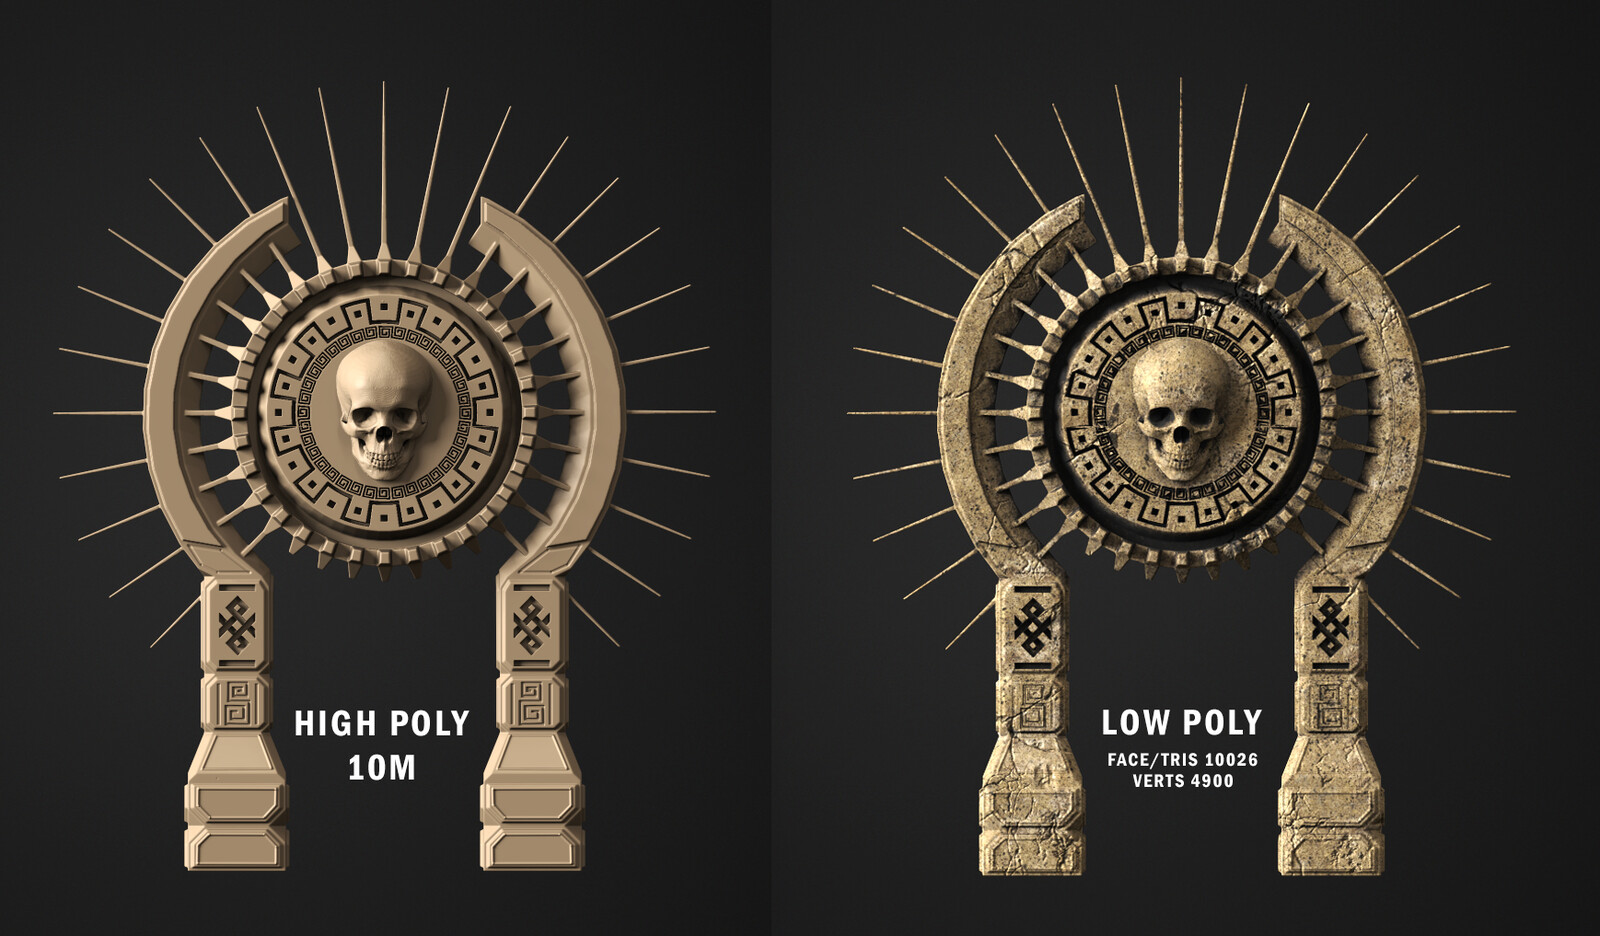 High Poly VS Low Poly